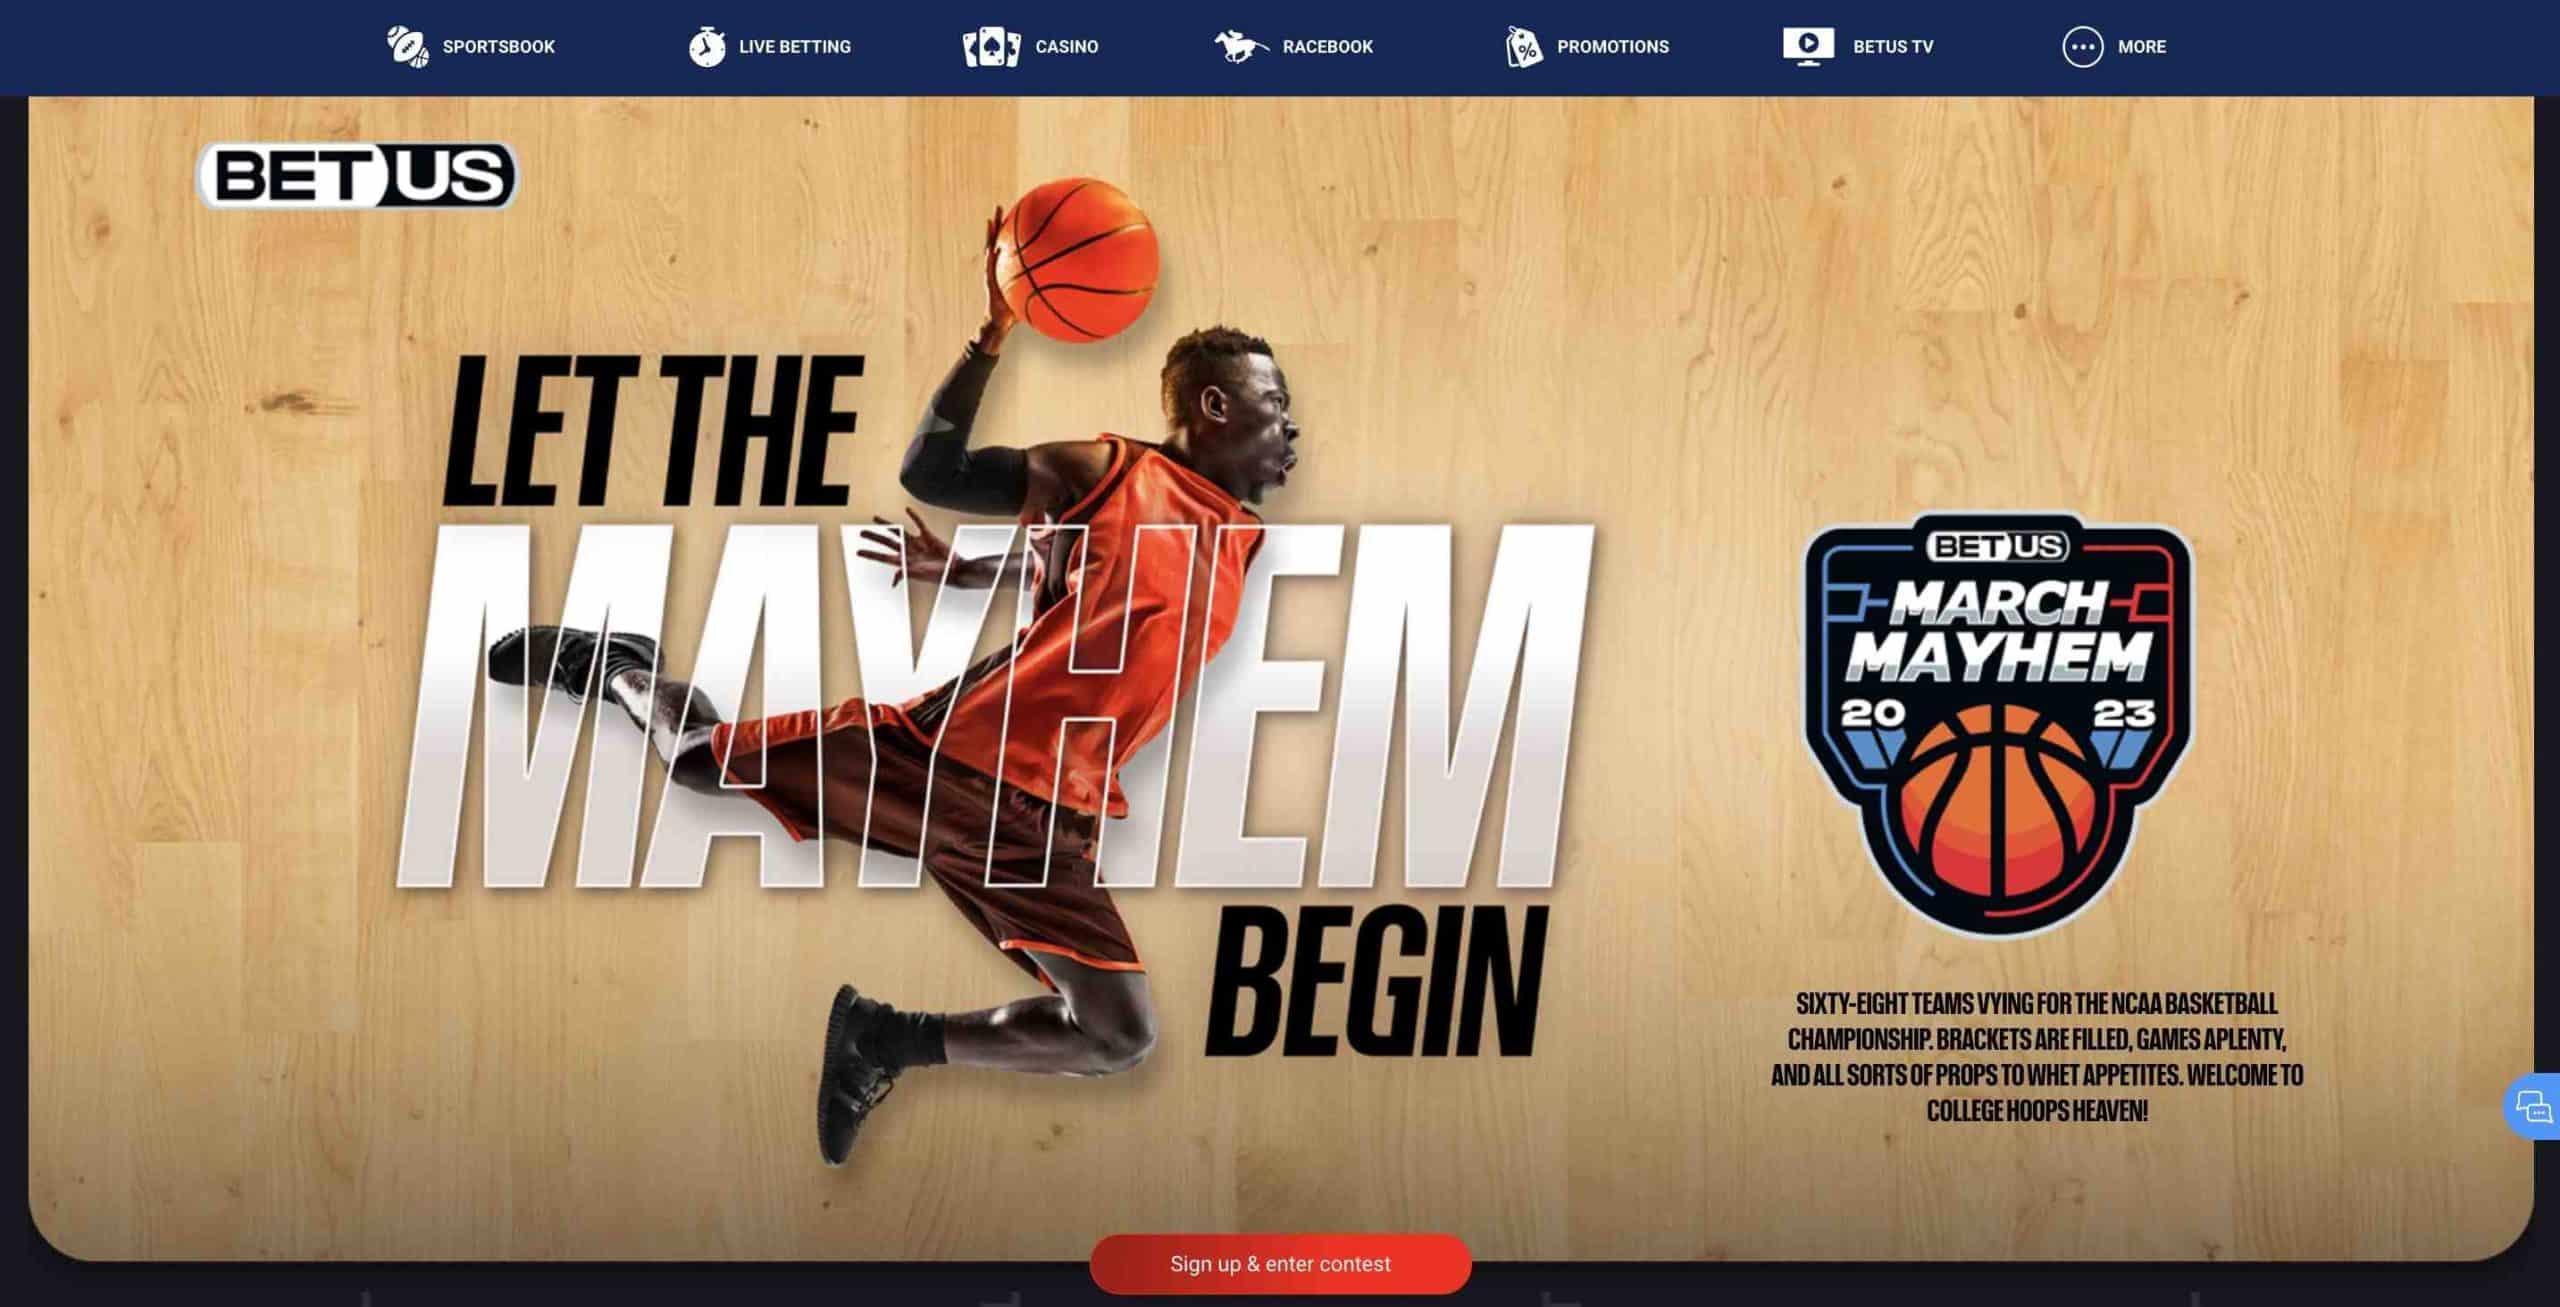 BetUS - March Madness Place Bets Online on Sweet 16 Teams